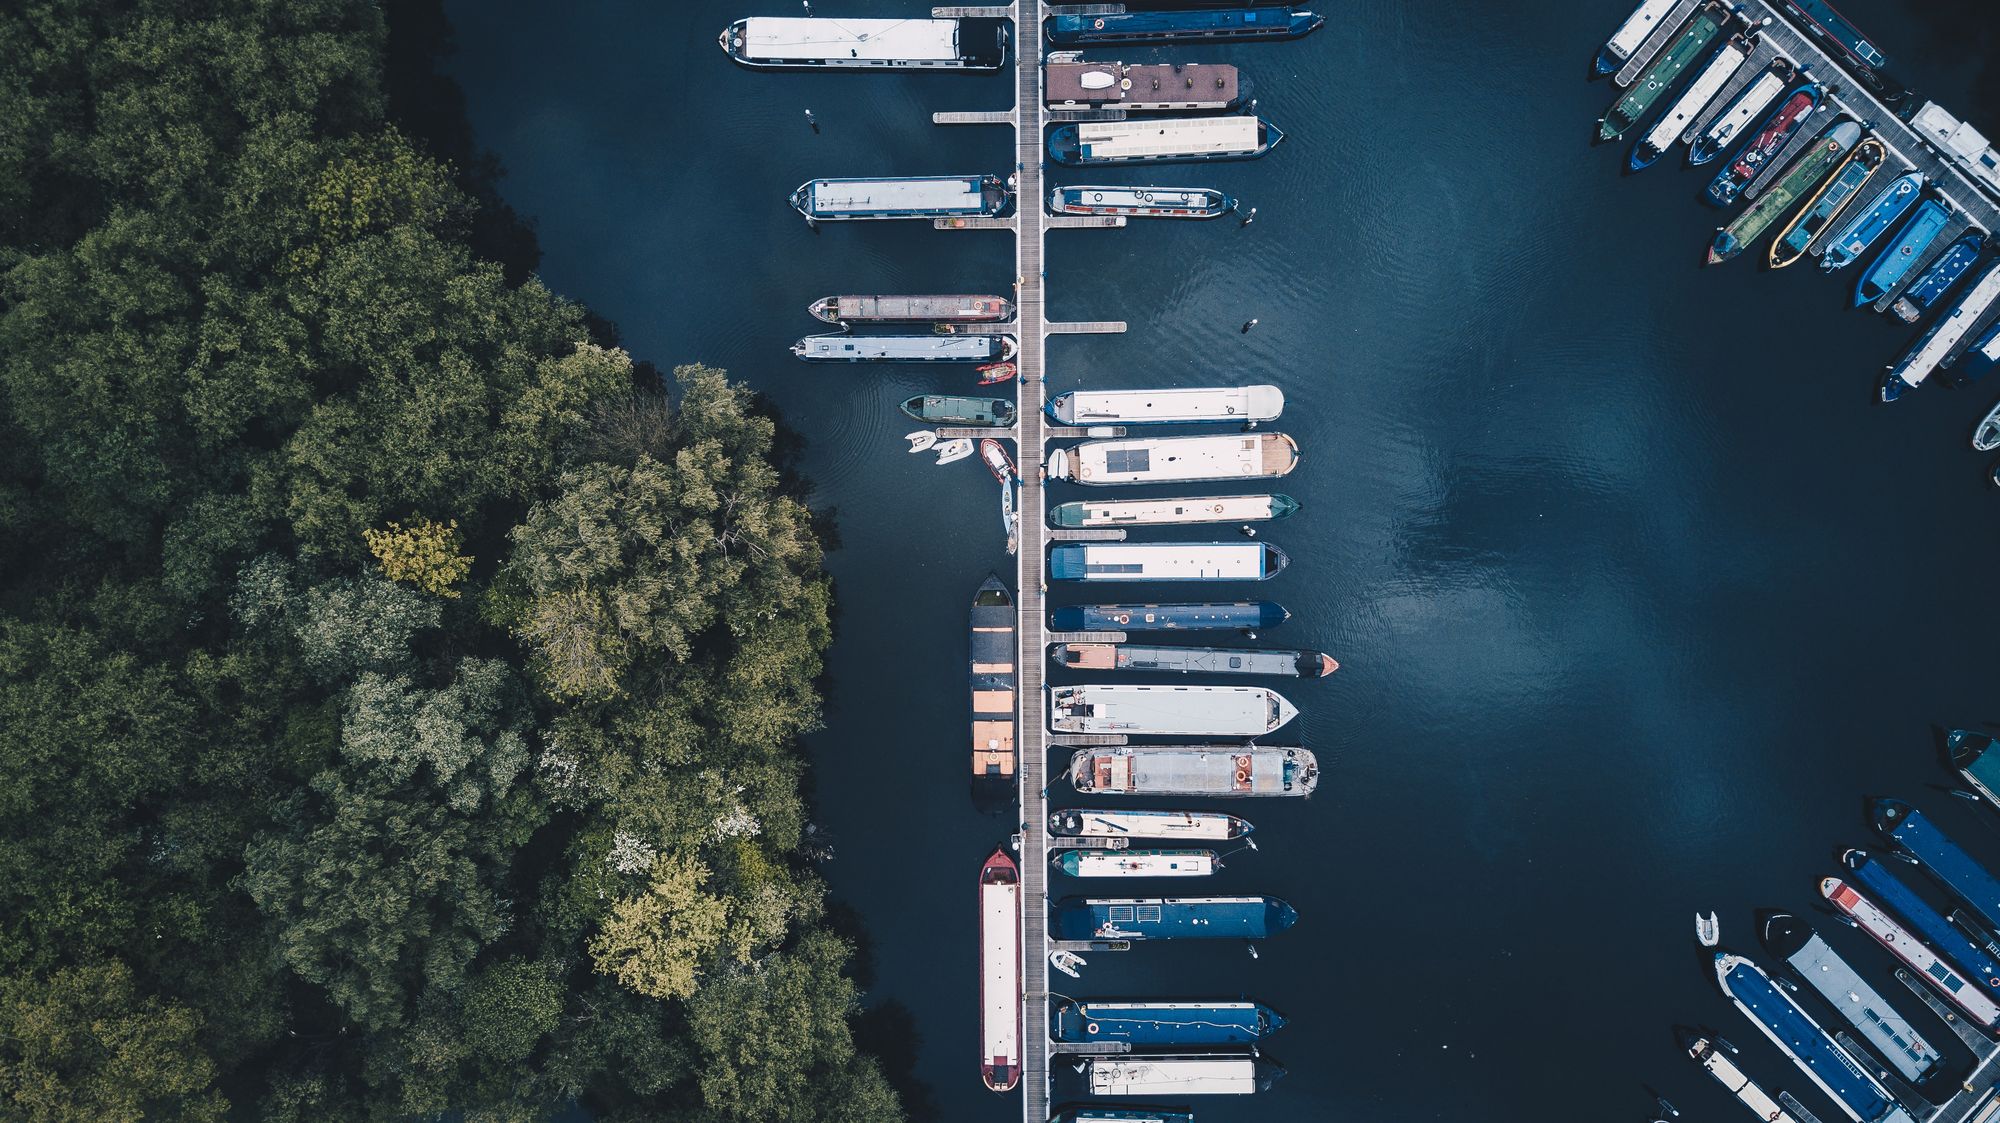 Aerial photo of docked boats on a dark blue body of water, next to some trees.